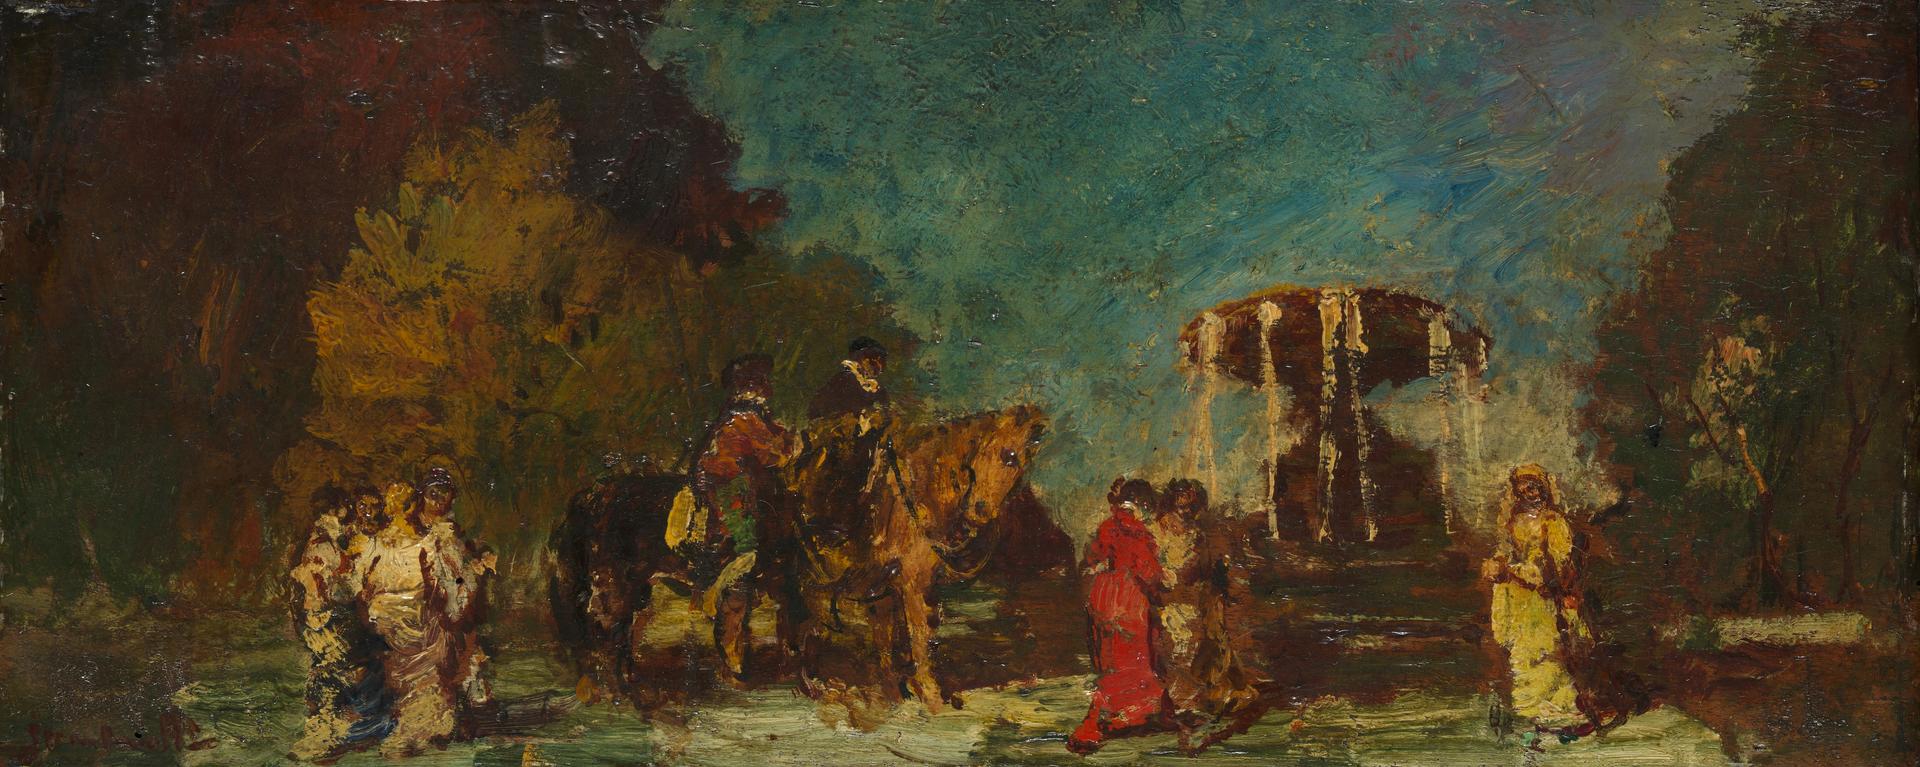 Fountain in a Park by Adolphe Monticelli